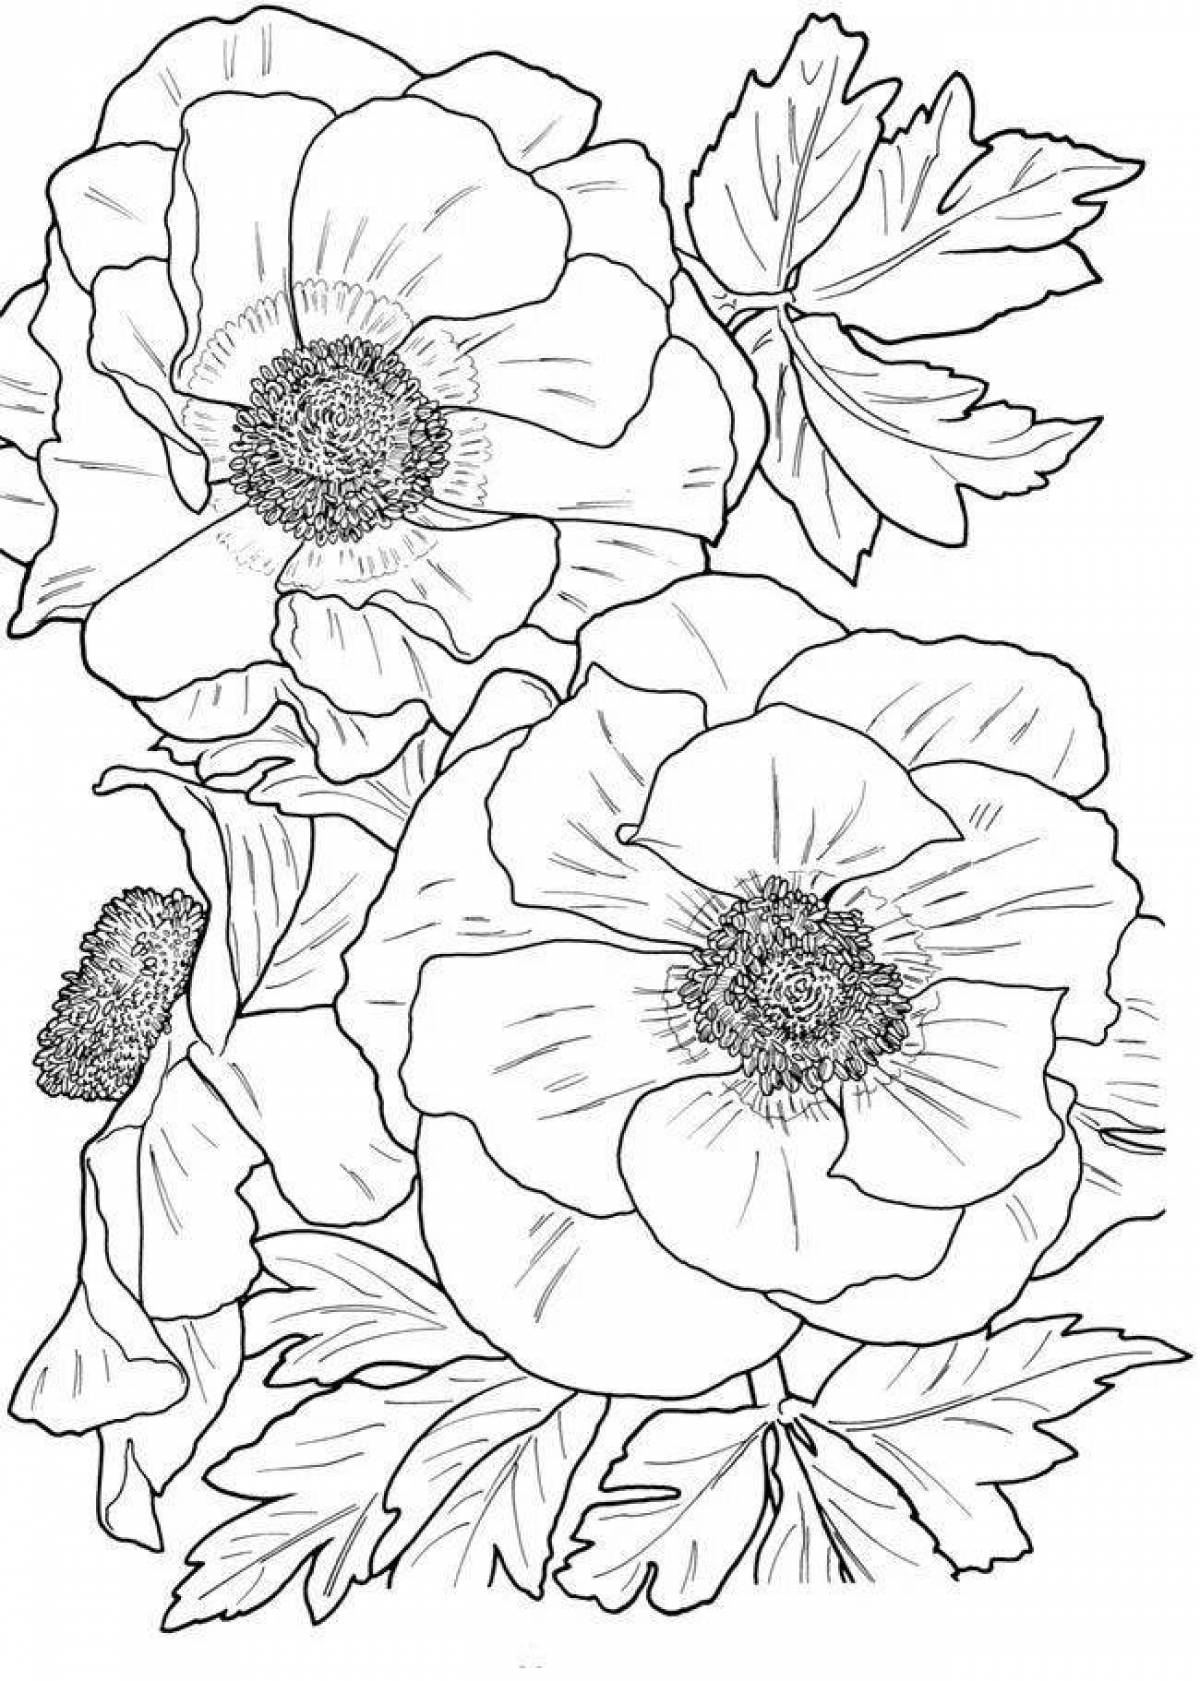 Playful gouache coloring page